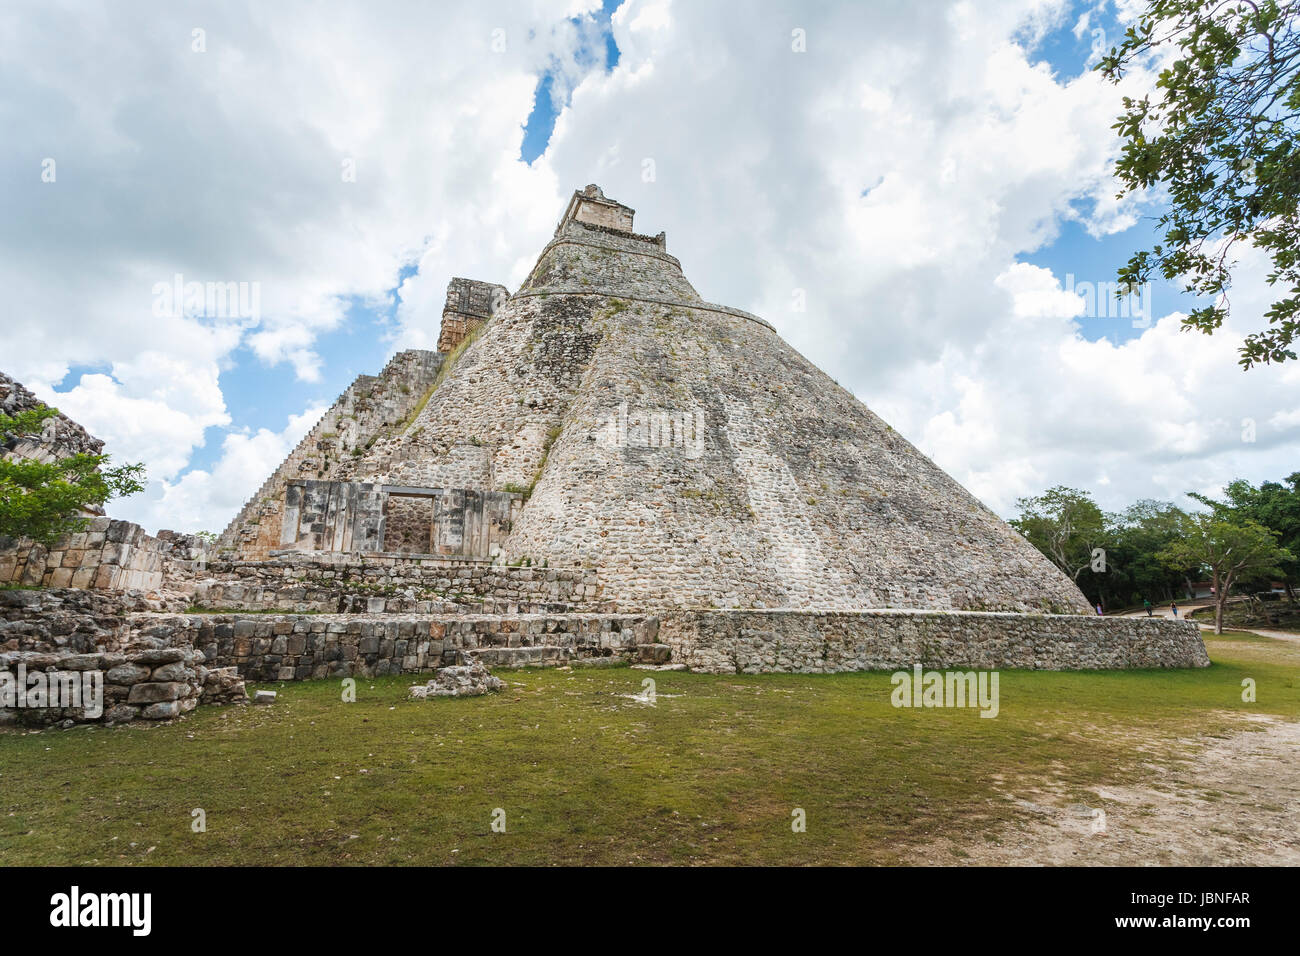 Pyramid of the Magician, Uxmal, an ancient Mesoamerican Maya city and archaeological site near Merida, Yucatan, Mexico, a UNESCO World Heritage Site Stock Photo